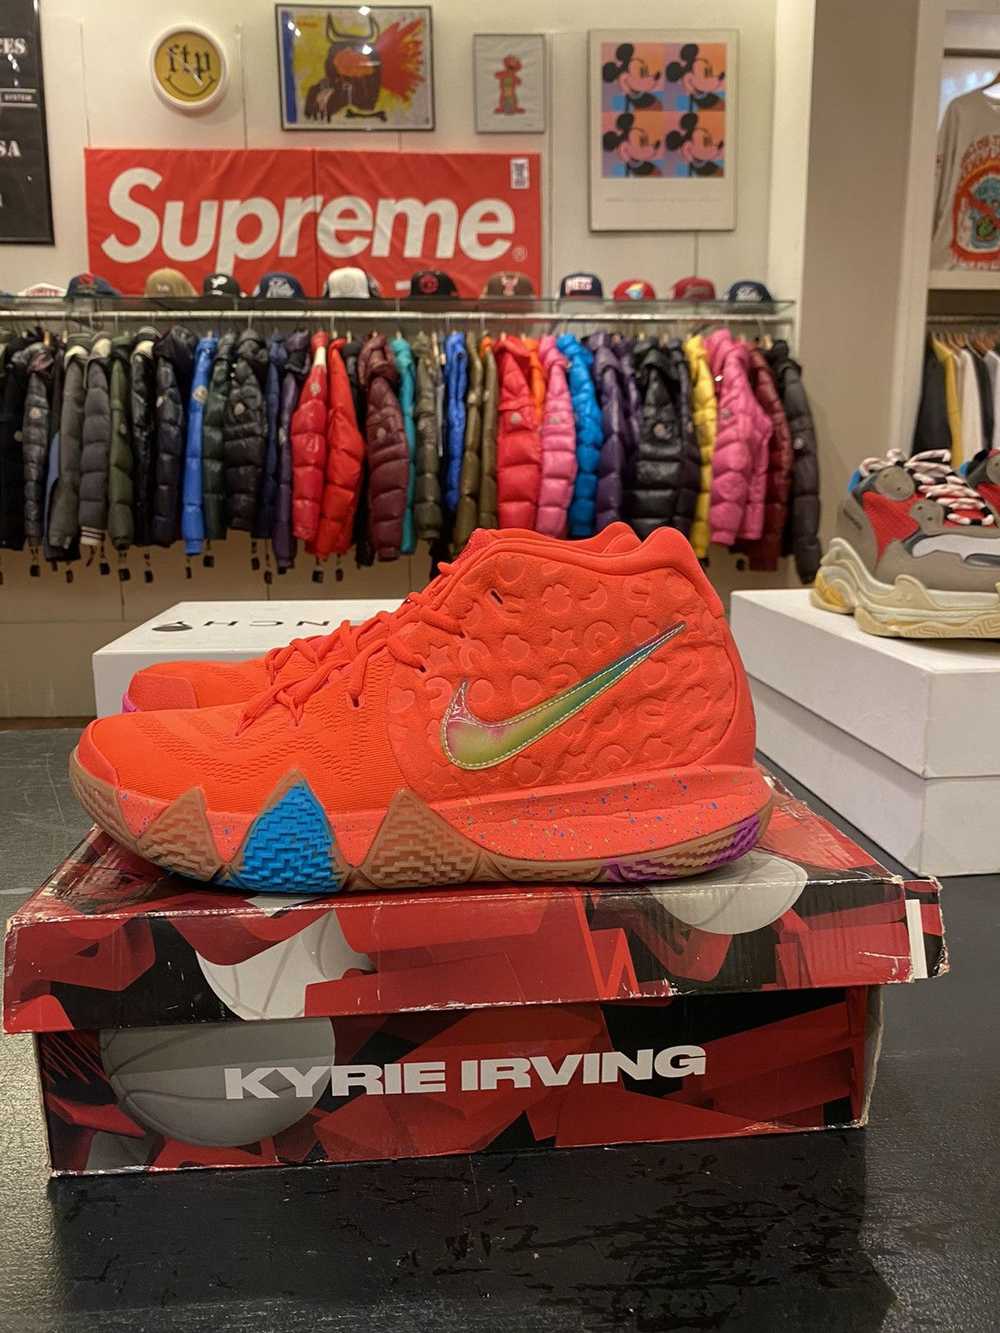 Nike Kyrie 4 lucky charms - image 1